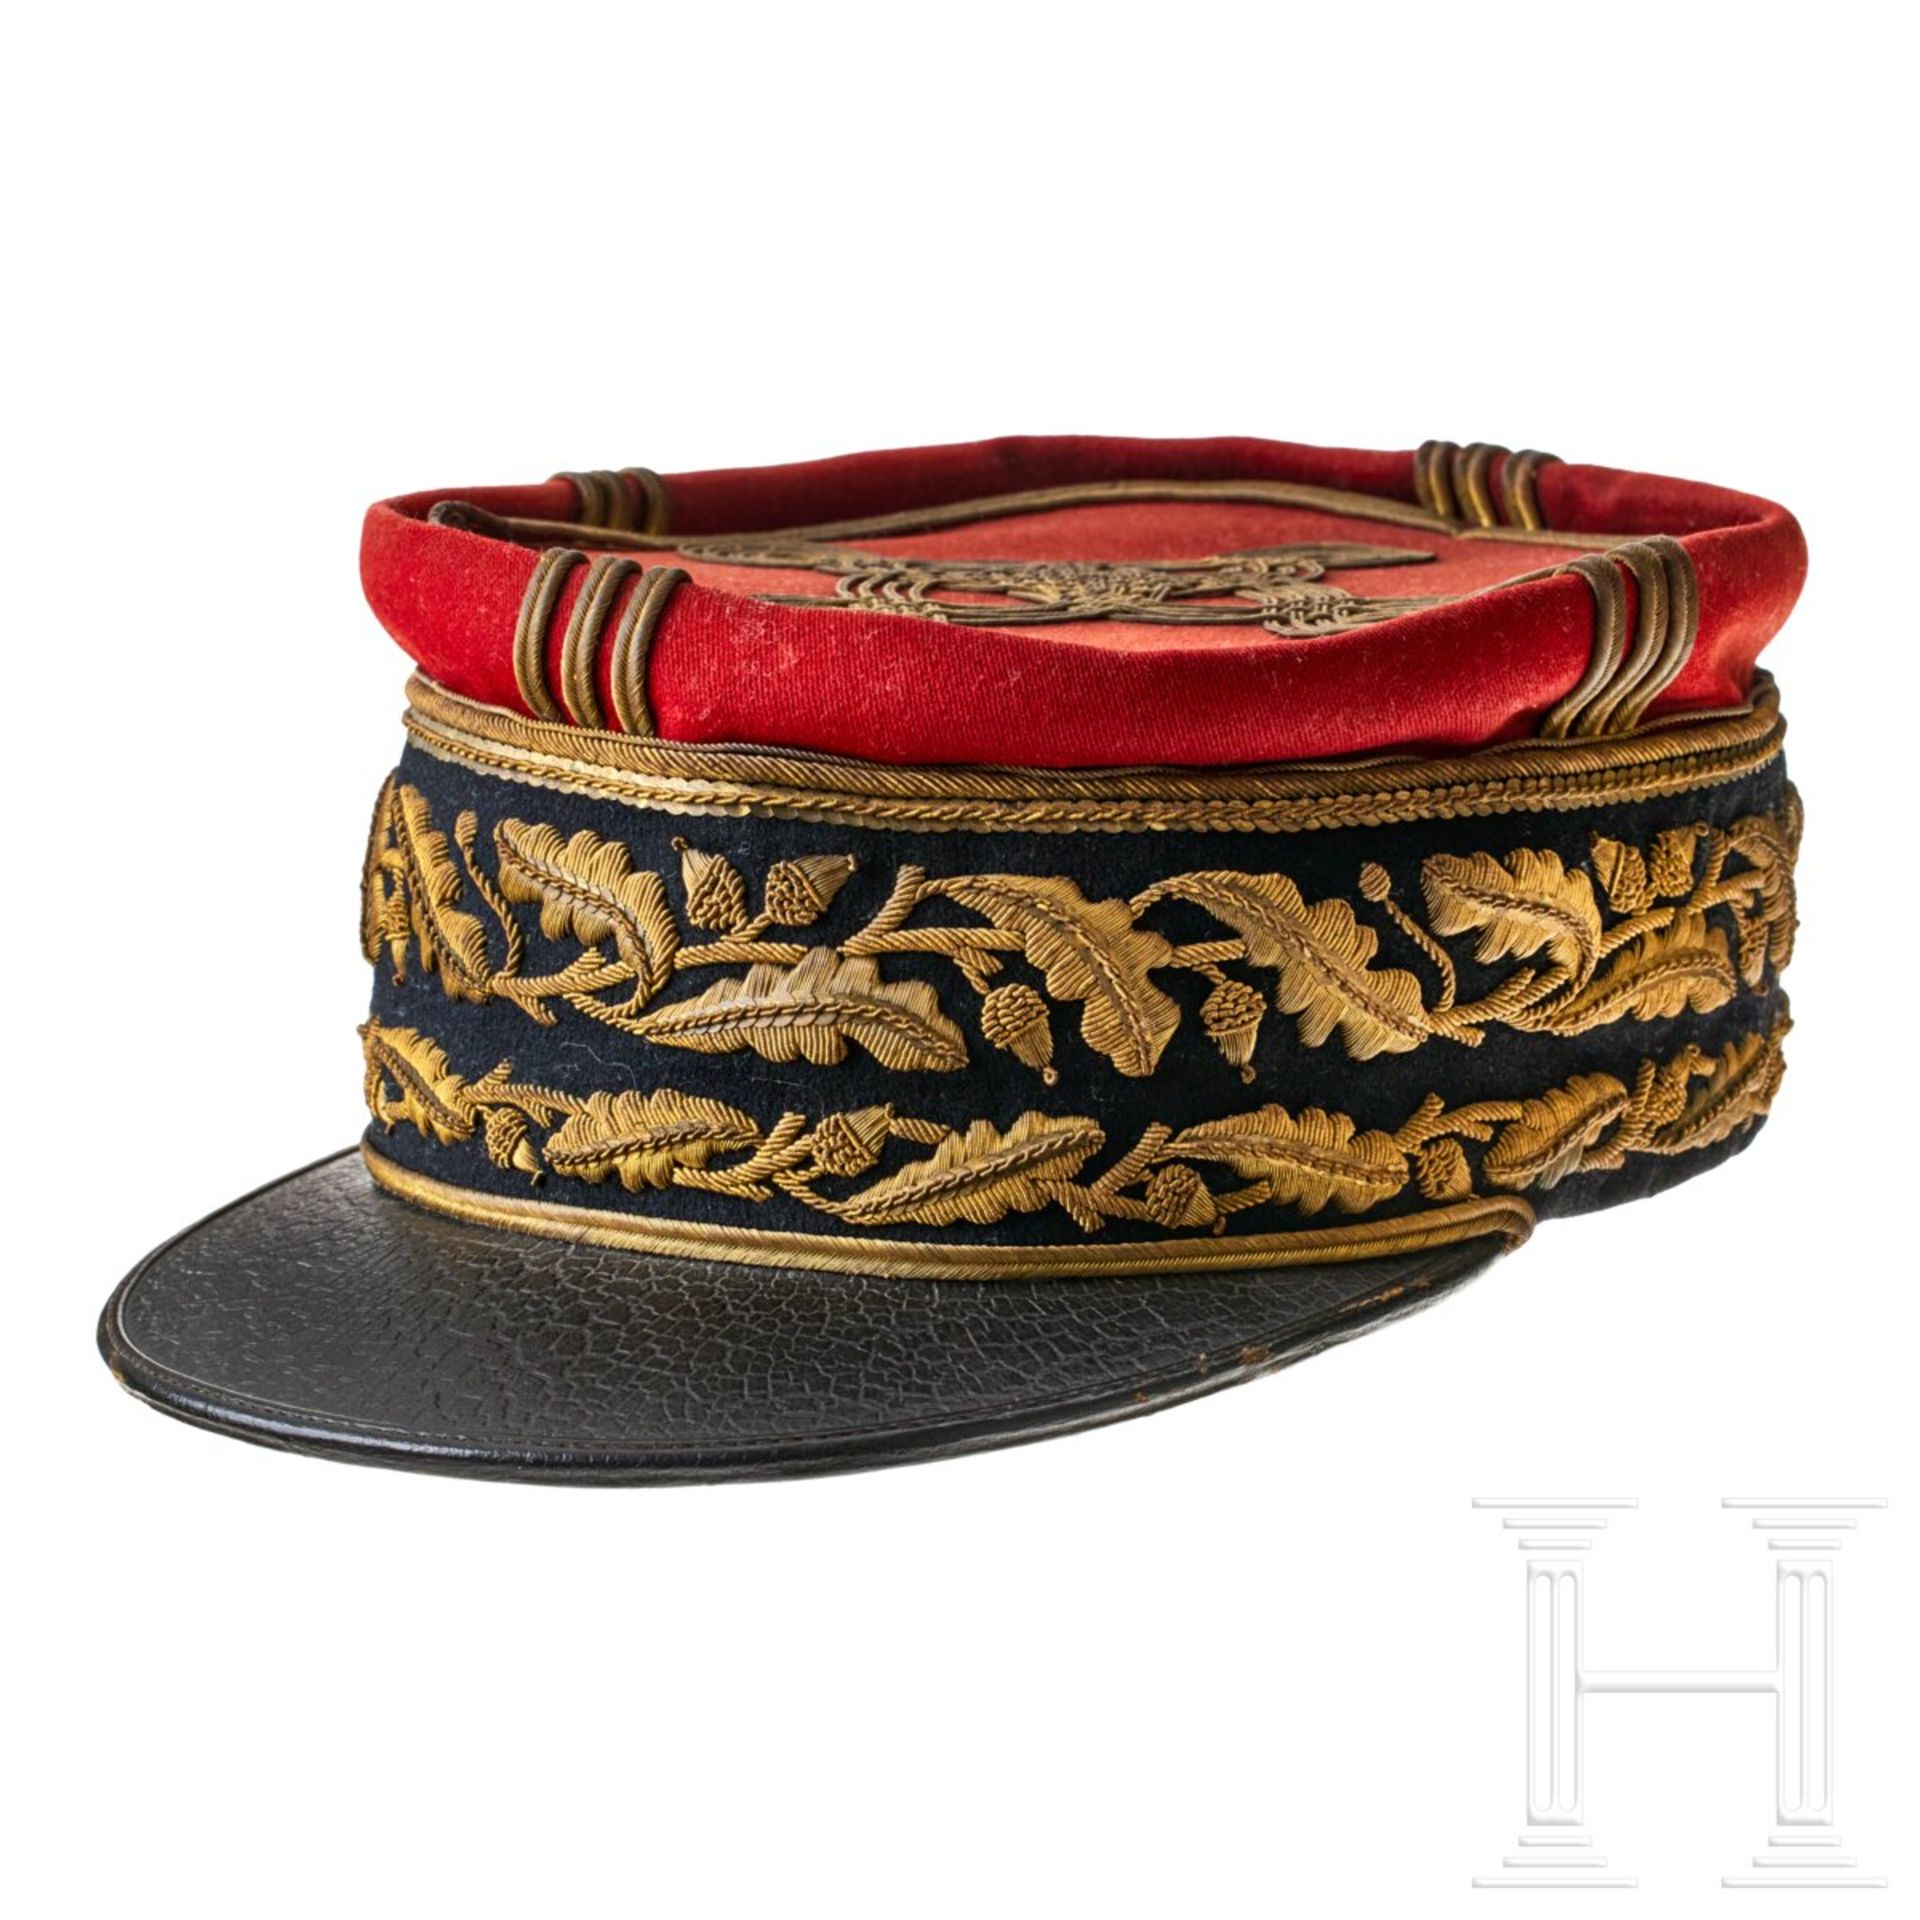 A kepi cap for a French General of Division